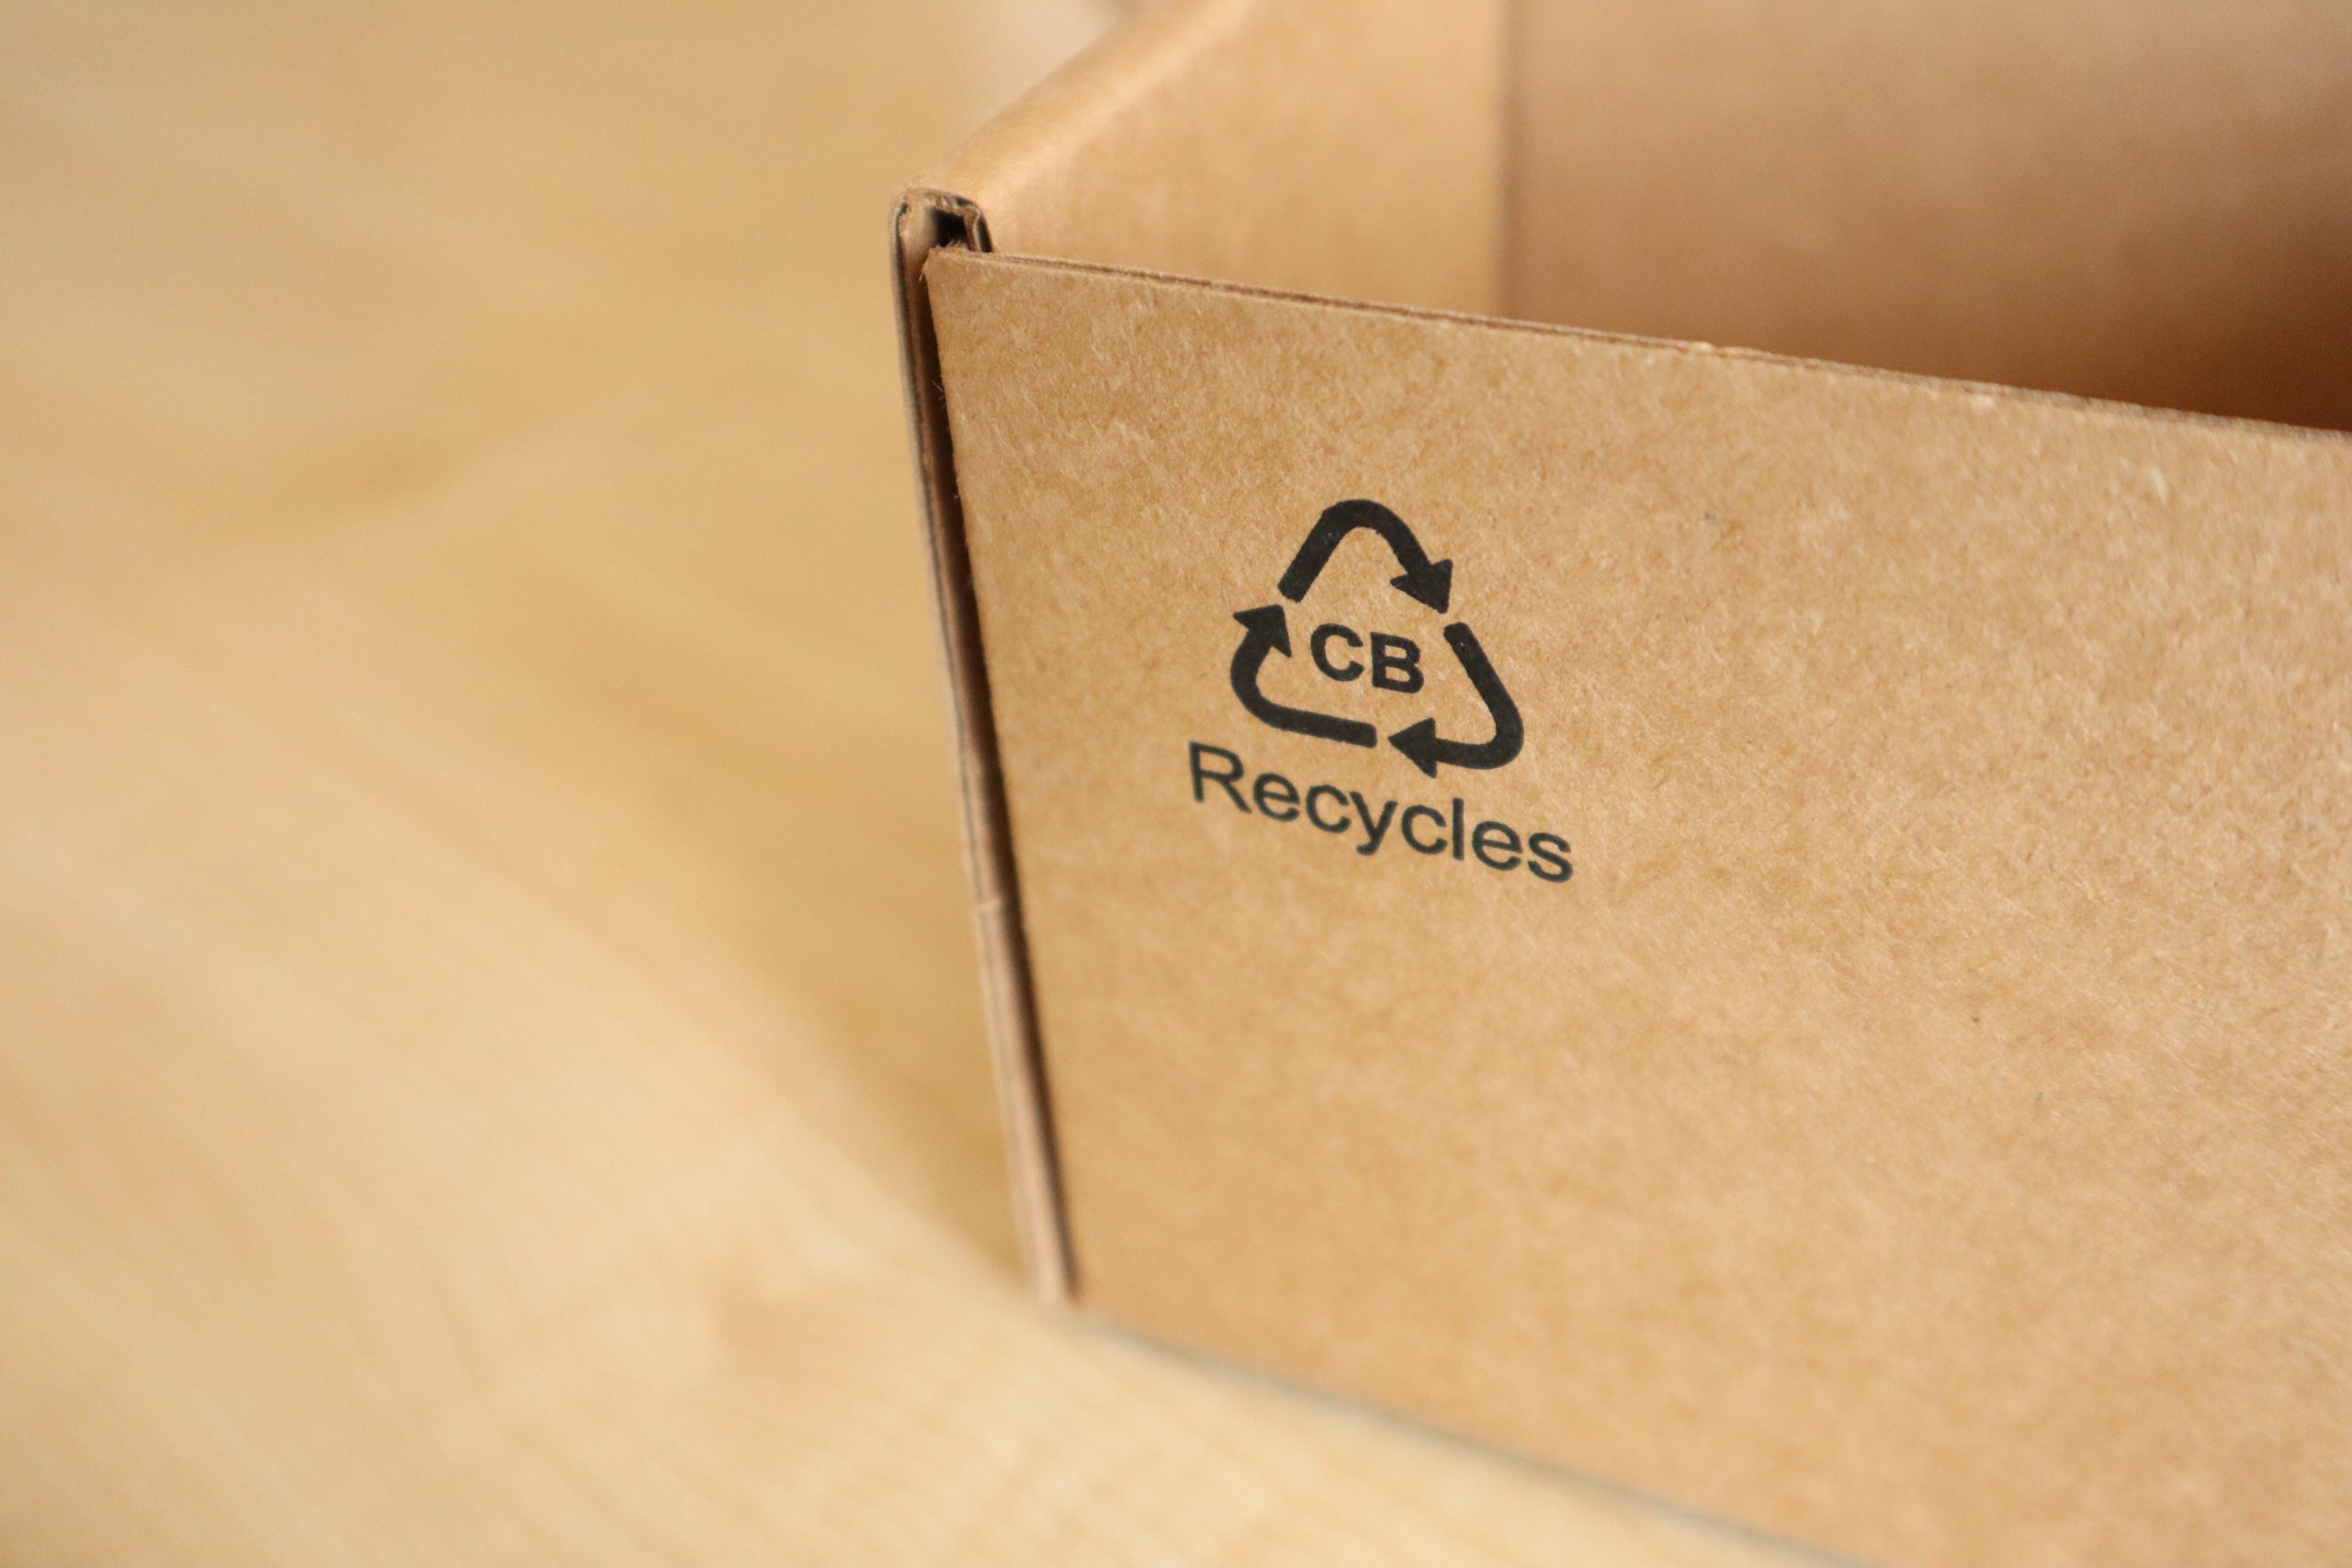 Use recycled paper and recycled print cartridges and recycle again to lower our carbon footprint.